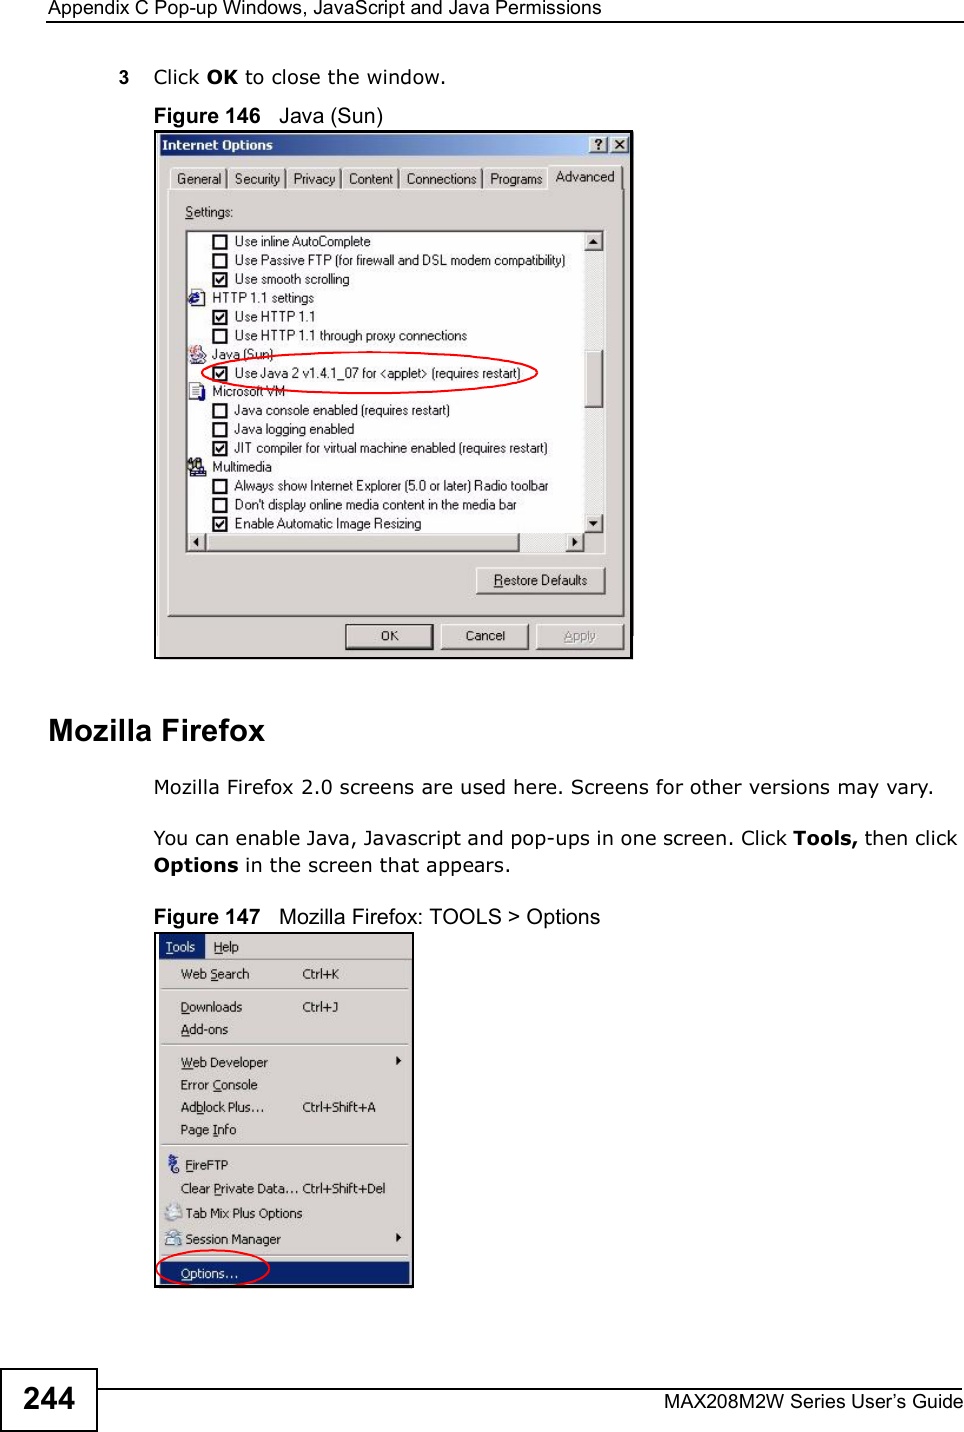 Appendix CPop-up Windows, JavaScript and Java PermissionsMAX208M2W Series User s Guide2443Click OK to close the window.Figure 146   Java (Sun)Mozilla FirefoxMozilla Firefox 2.0 screens are used here. Screens for other versions may vary. You can enable Java, Javascript and pop-ups in one screen. Click Tools, then click Options in the screen that appears.Figure 147   Mozilla Firefox: TOOLS &gt; Options